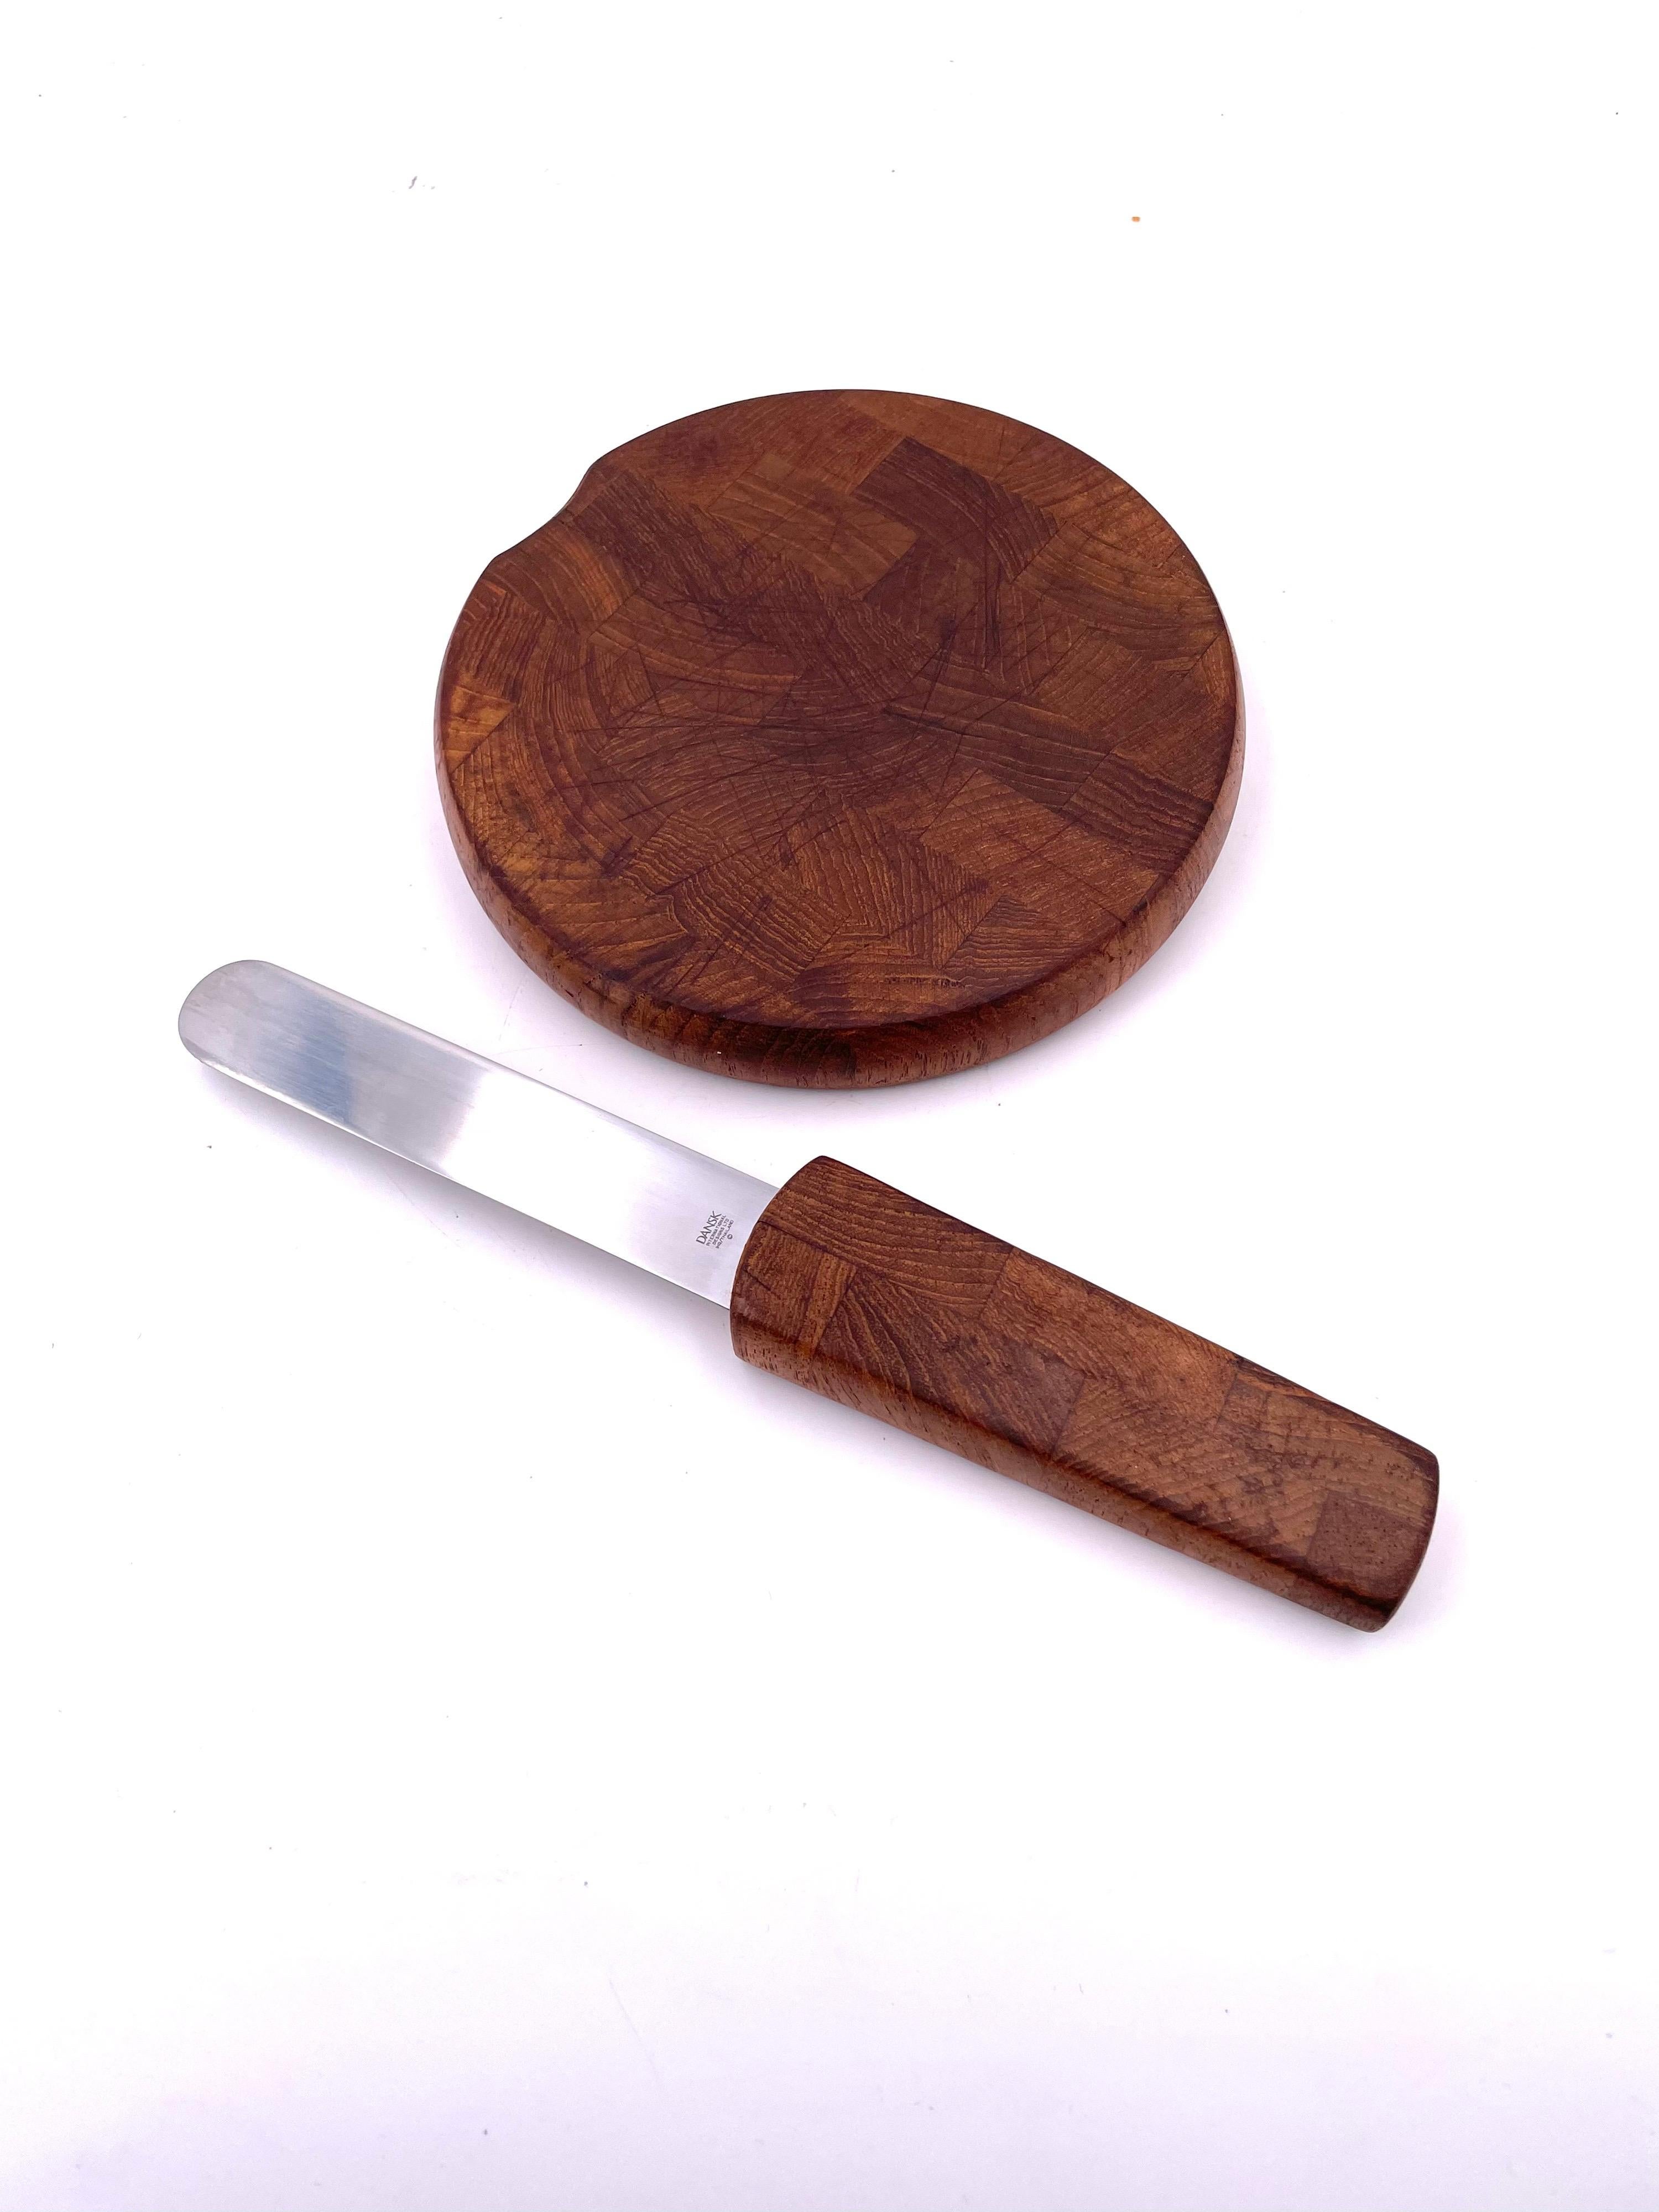 Simple design versatile and practical portable Dansk cheese and crackers butcherblock tray, in solid teak with knife, circa 1980's. the knife hides inside the tray.